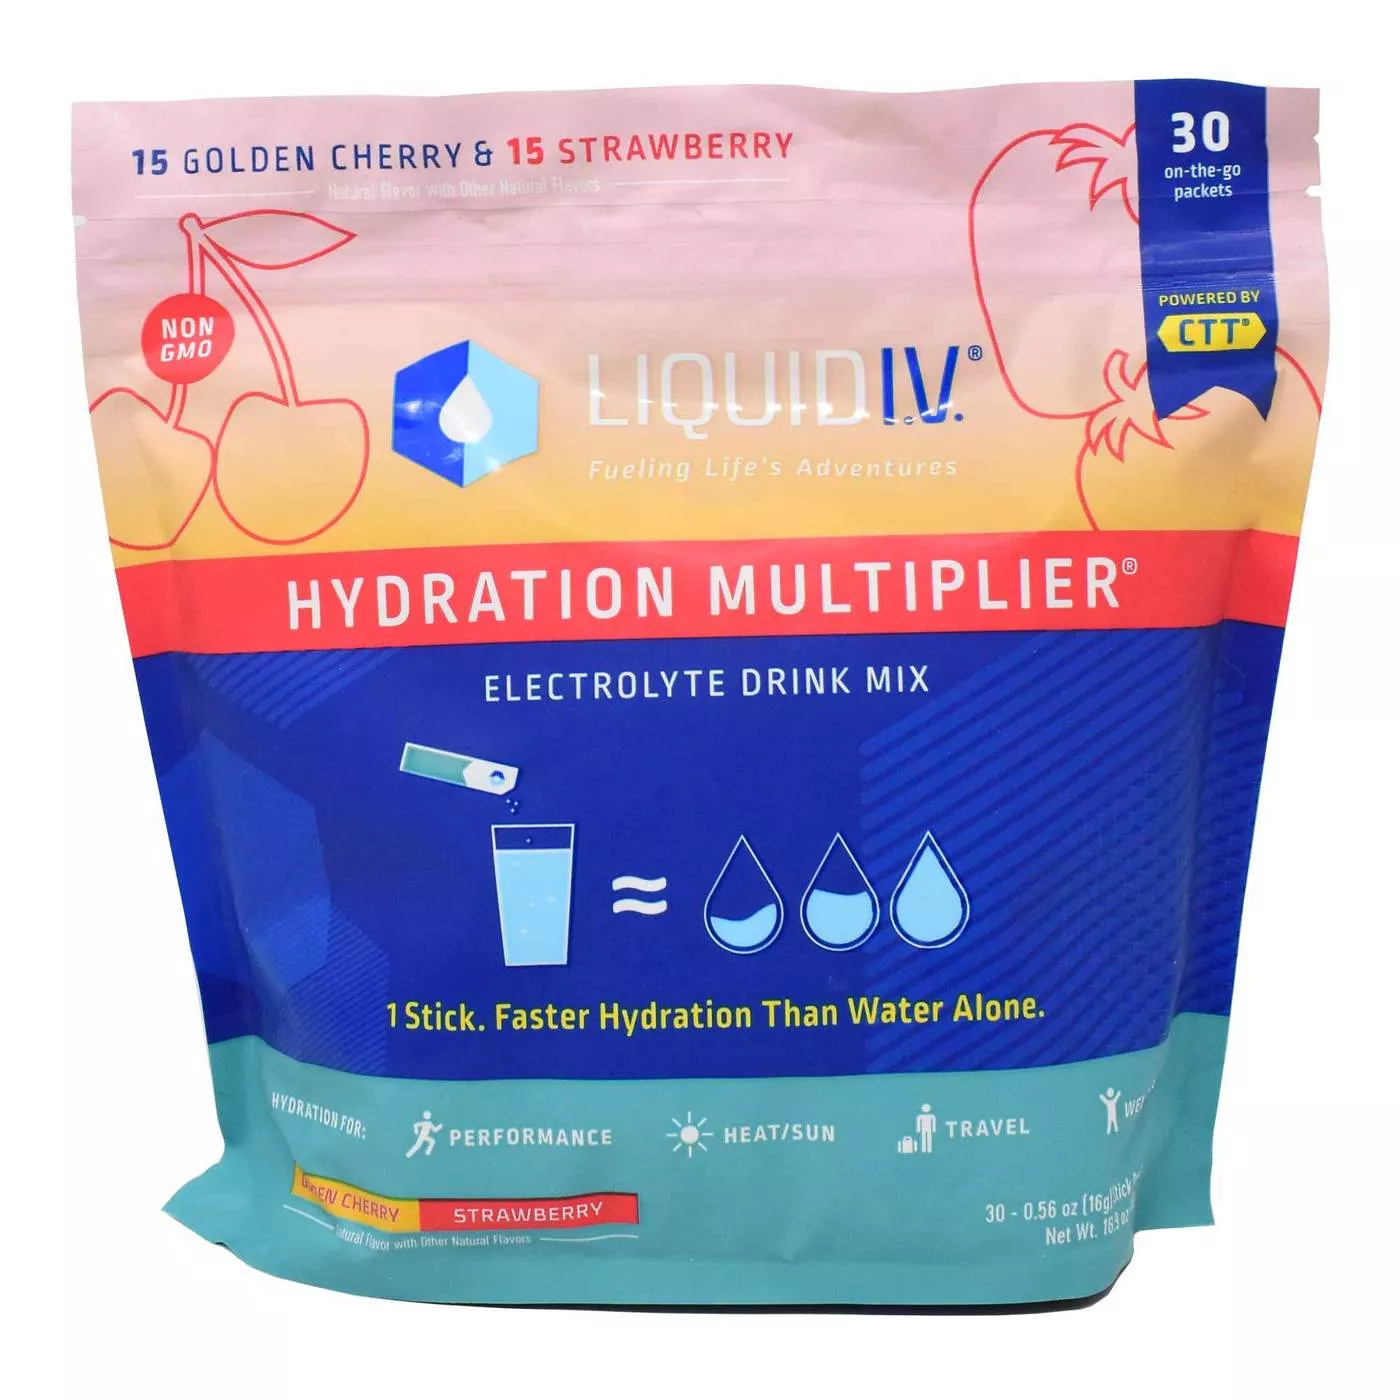 Liquid IV Hydration Multiplier Golden Cherry and Strawberry - 30 Packets